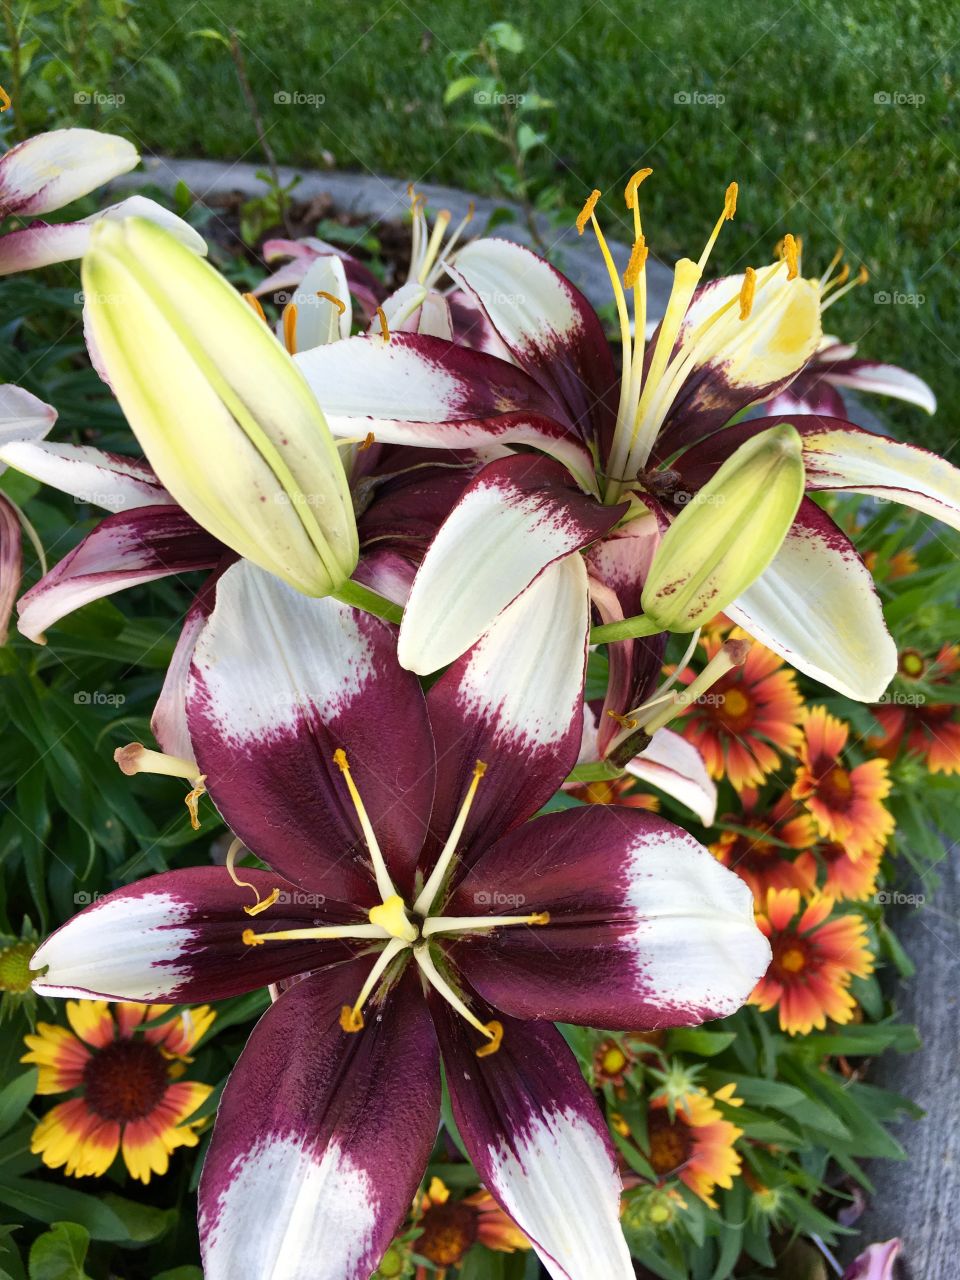 Lily flower. To town. Beautiful. Flower. Blossom. Bloom. Maroon. White. Burgundy.